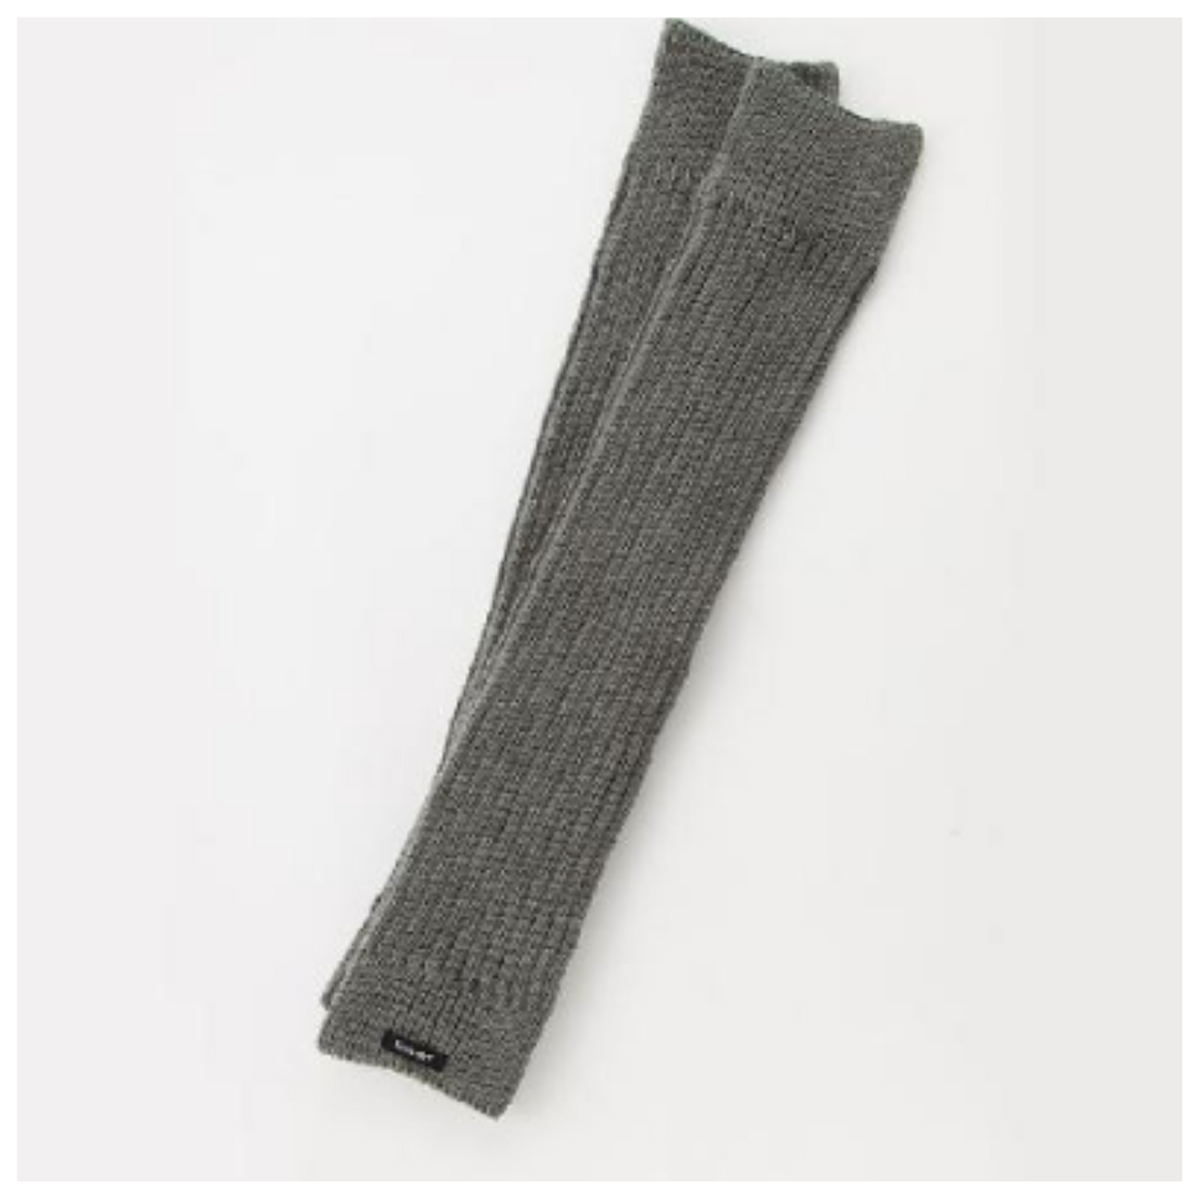 Knitido Ribbed Leg Warmer in heather gray on display